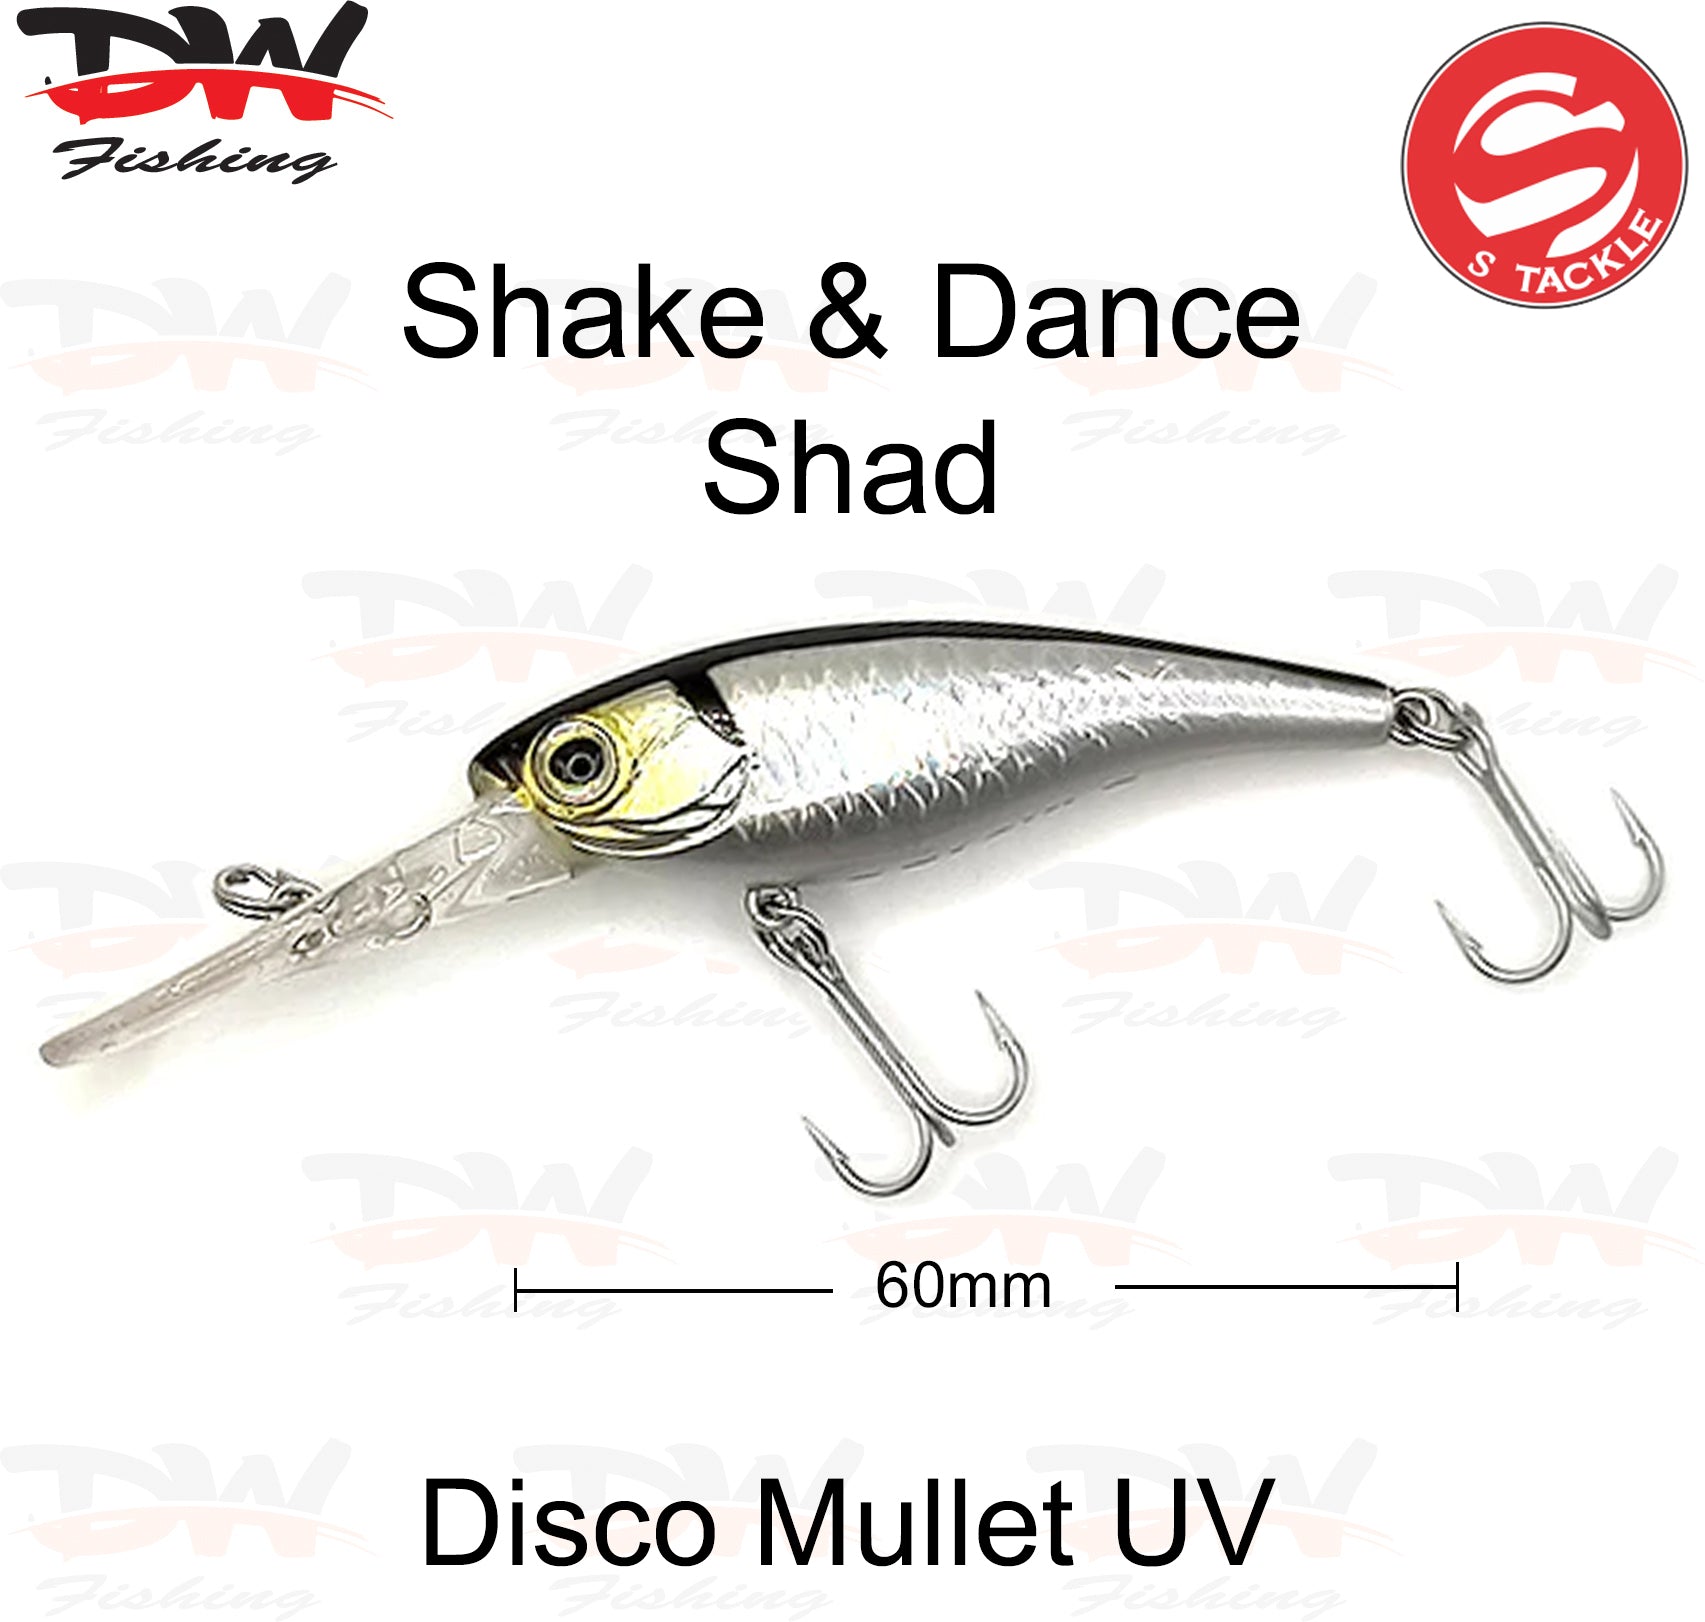 The Shake and Dance Hard Body 60mm lure colour is Disco Mullet UV